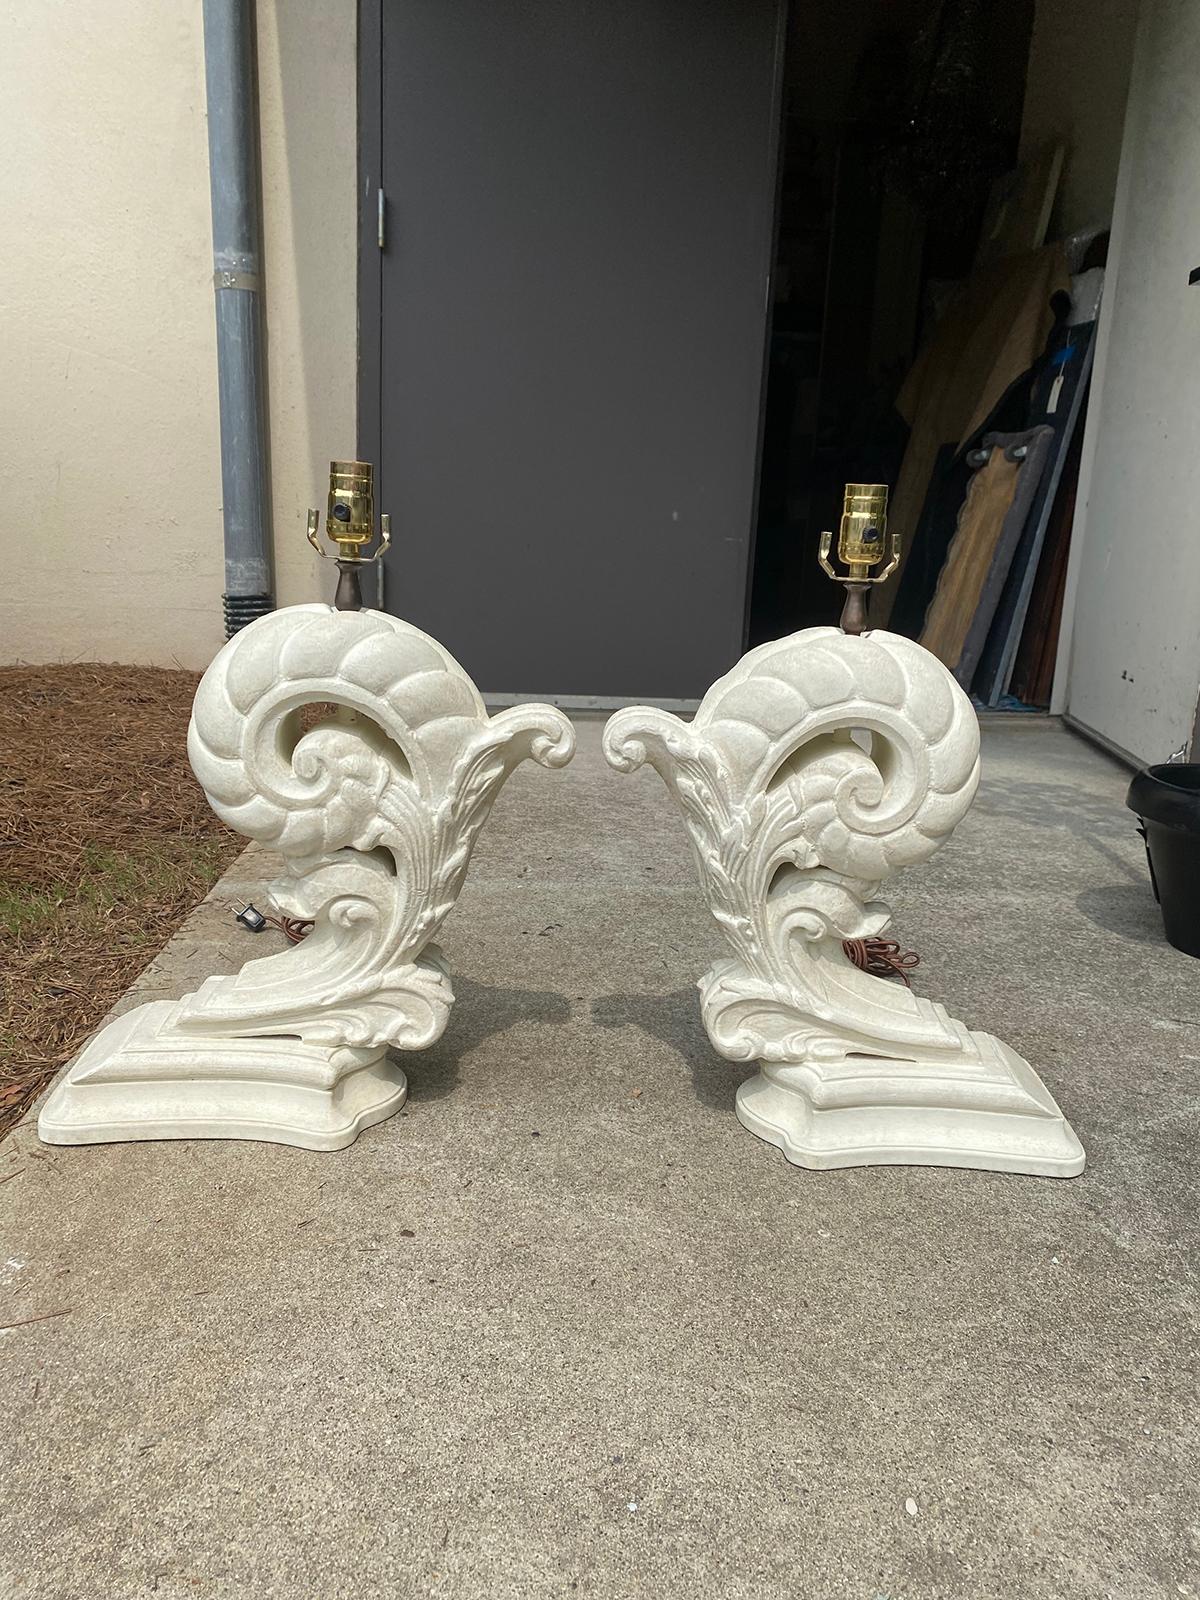 Pair of 20th century painted architectural elements as lamps, custom finish
New wiring.